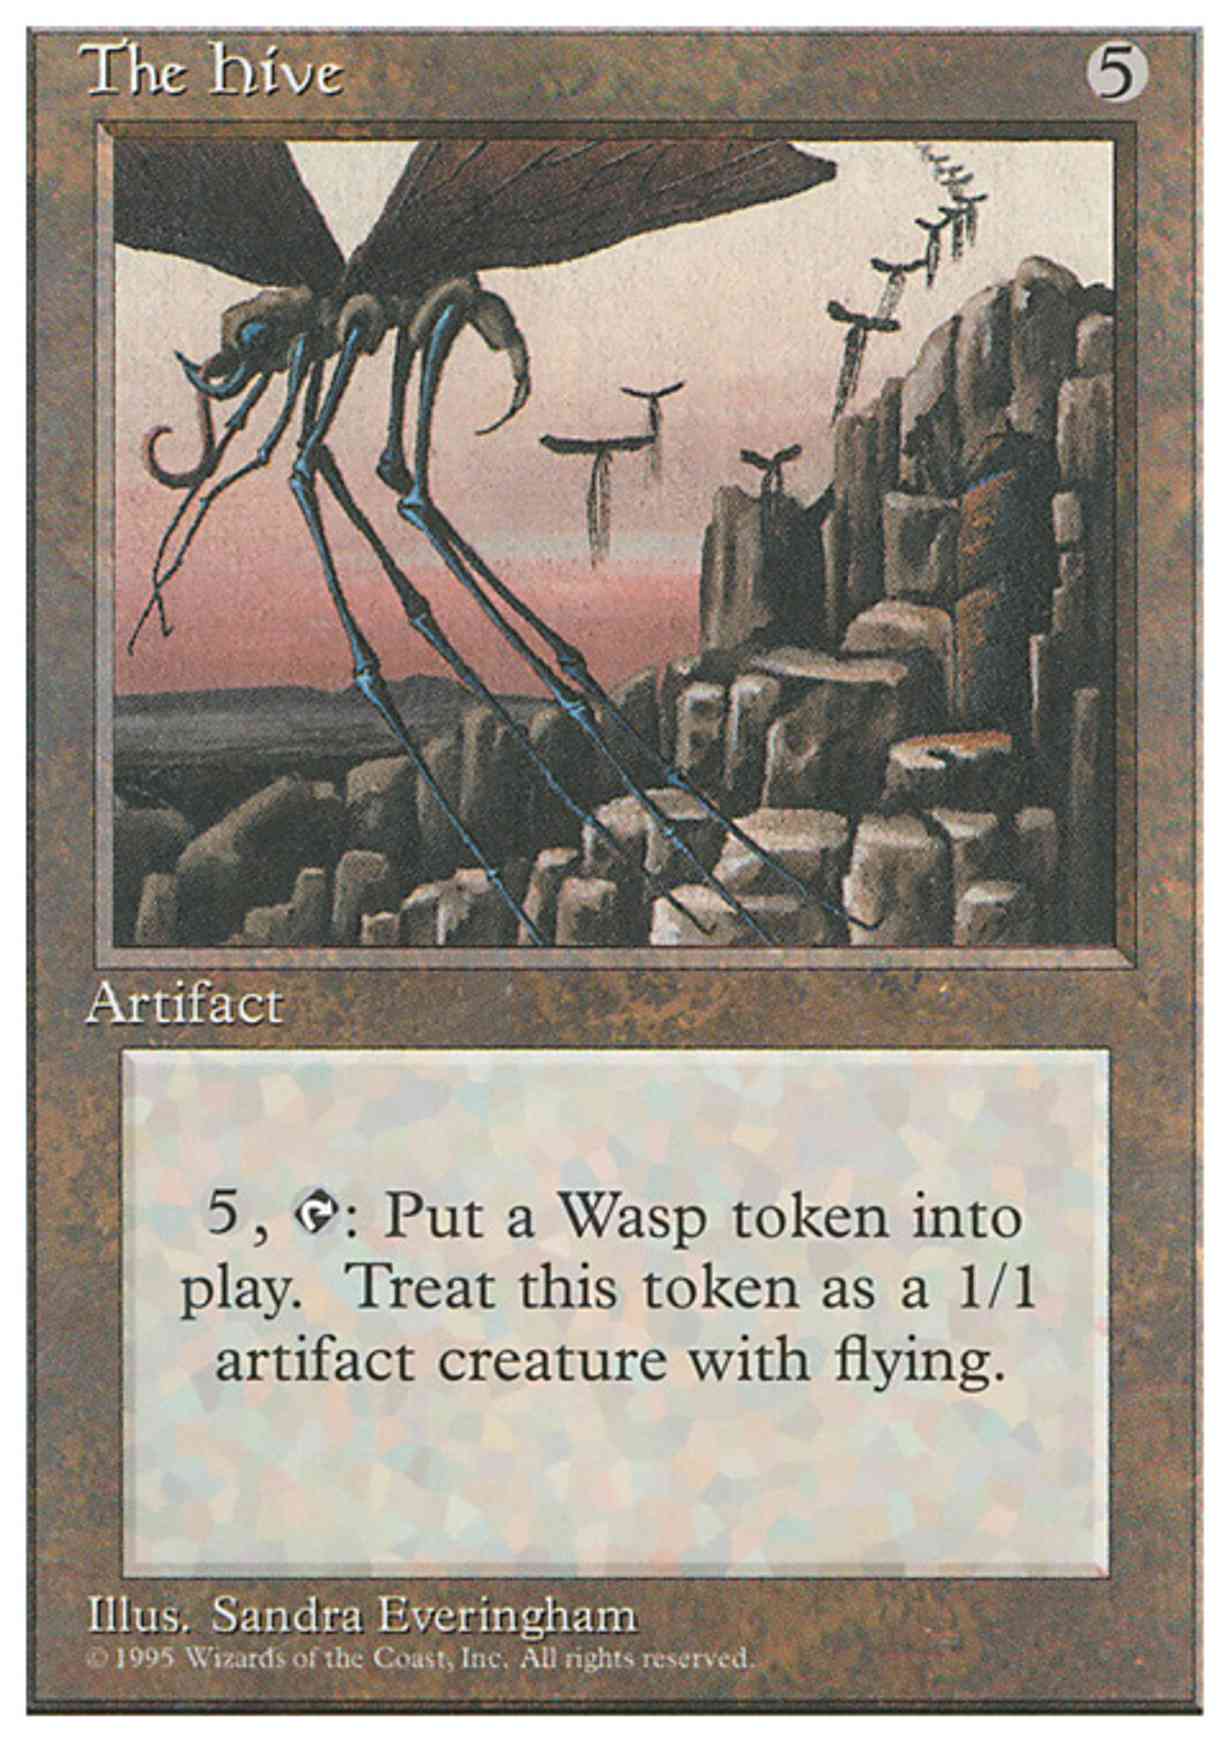 The Hive magic card front